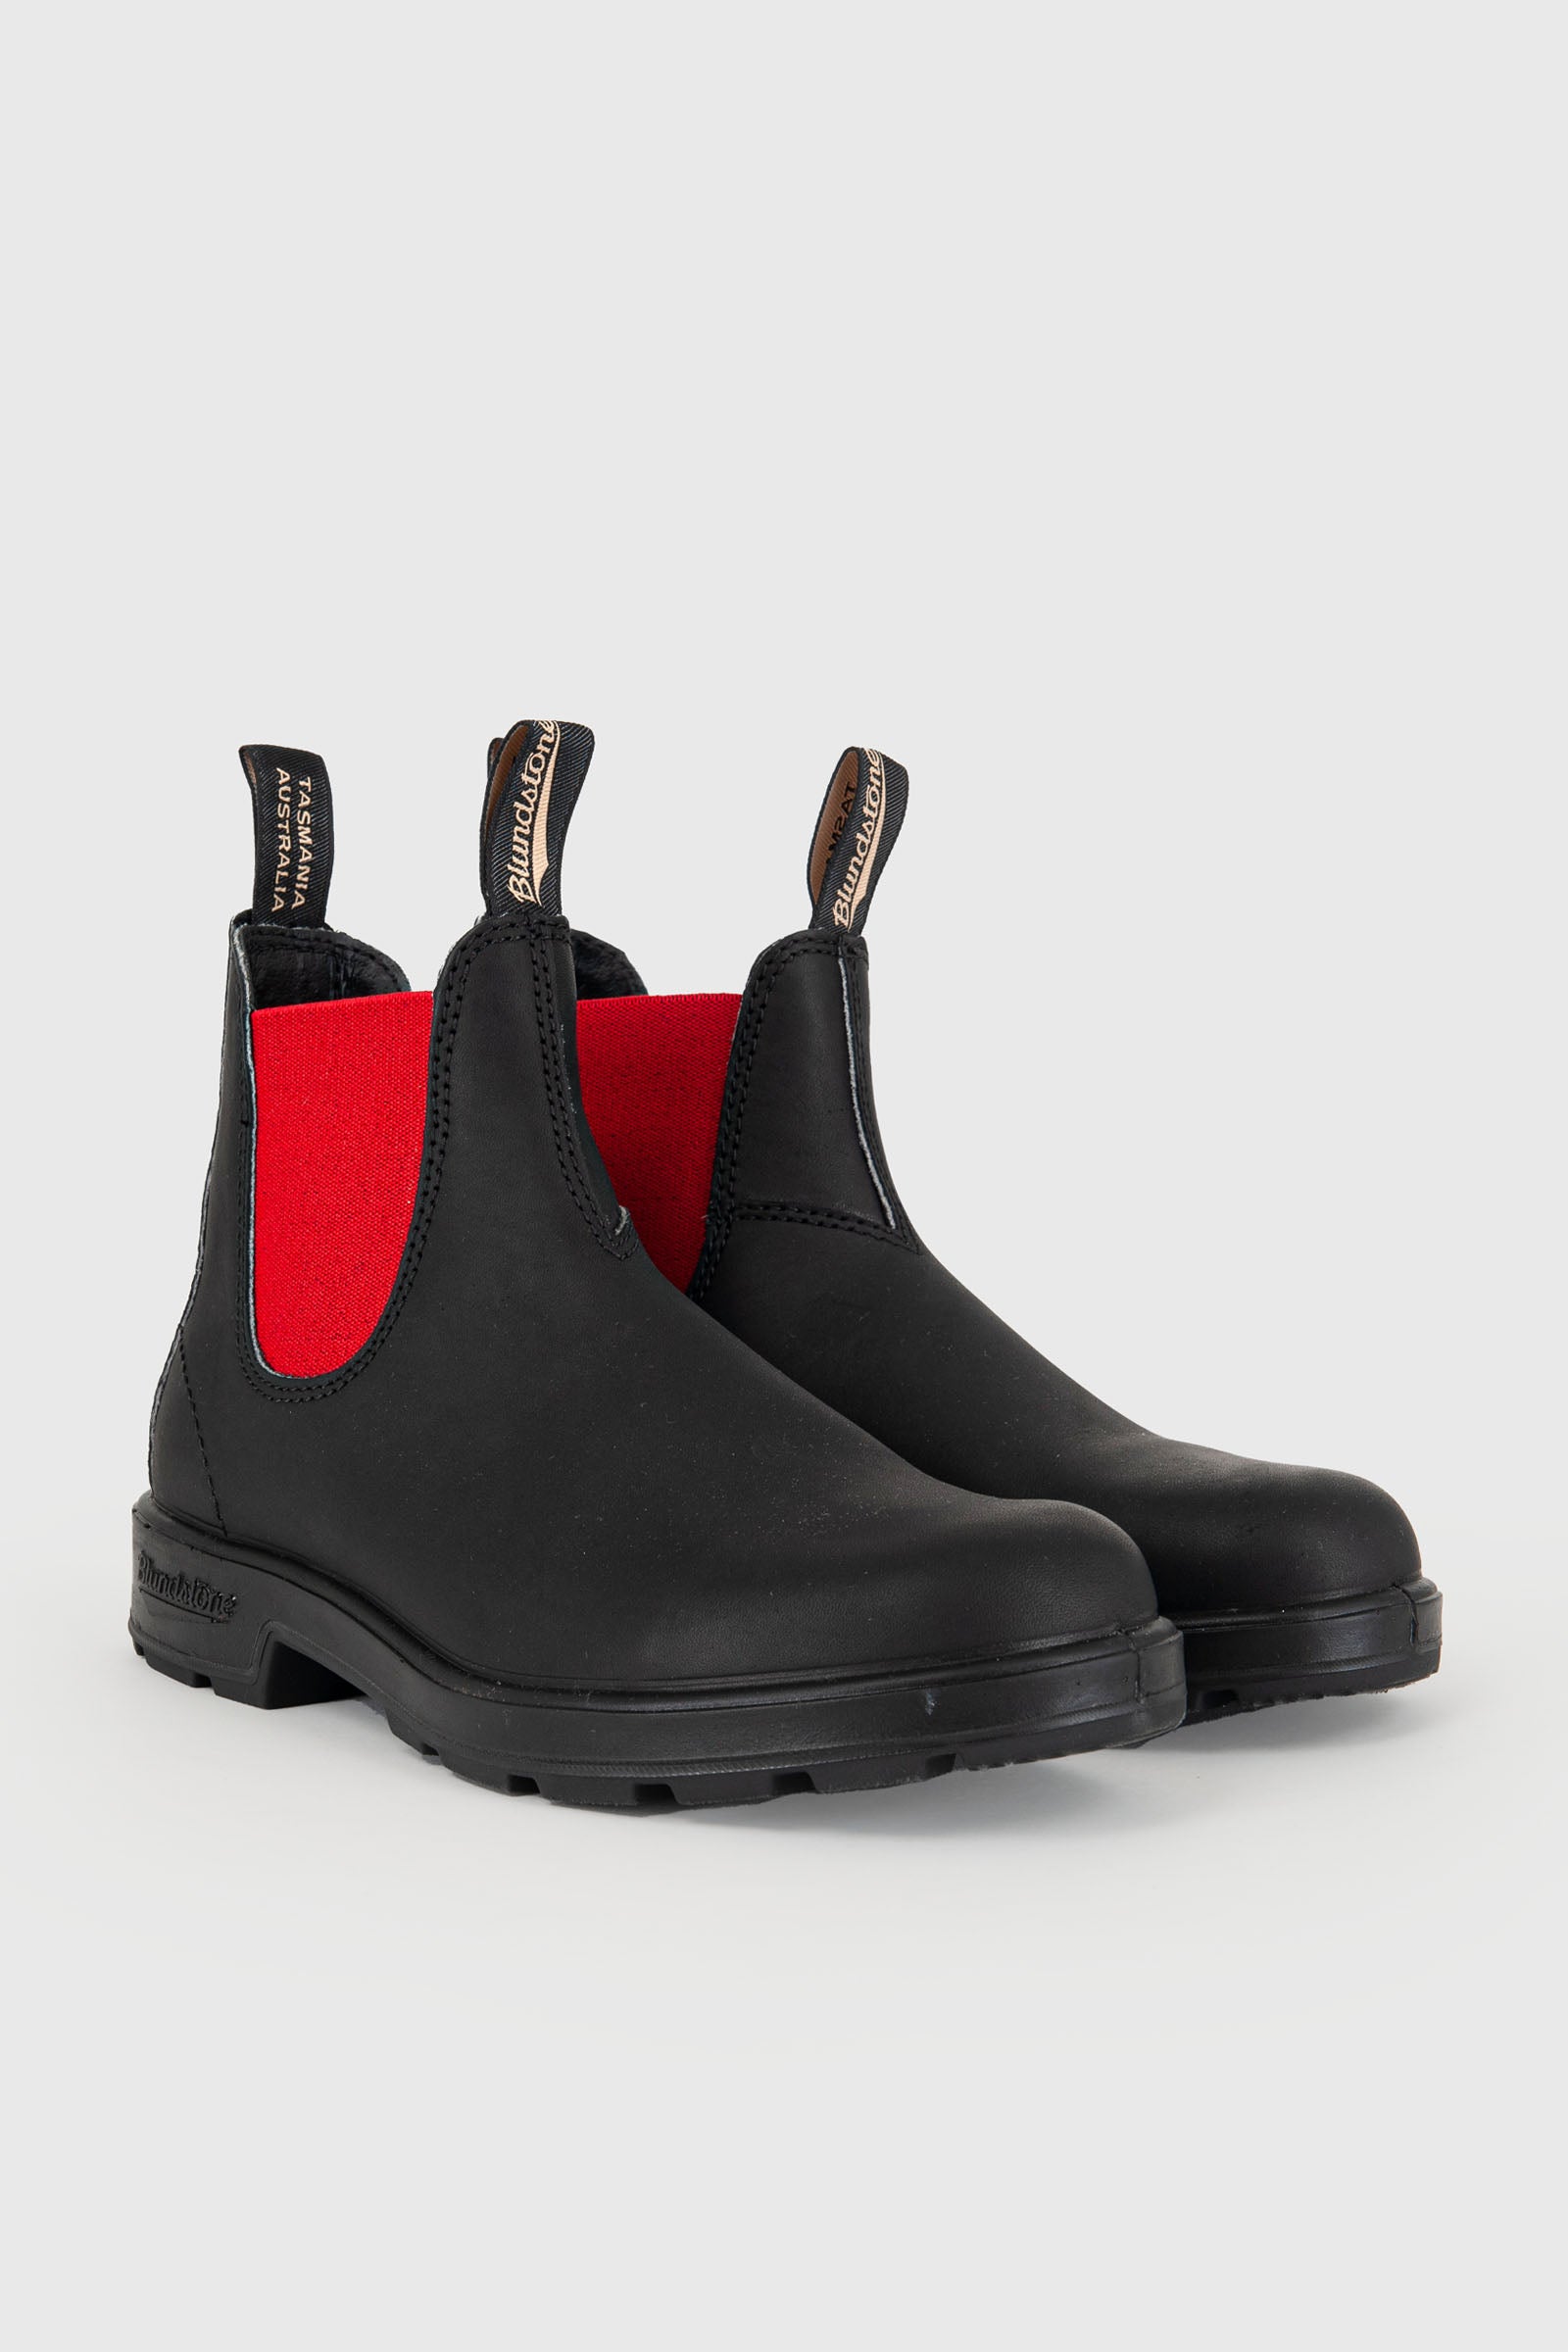 Blundstone Beatle Ankle Boot 508 Leather Black/Red - 3